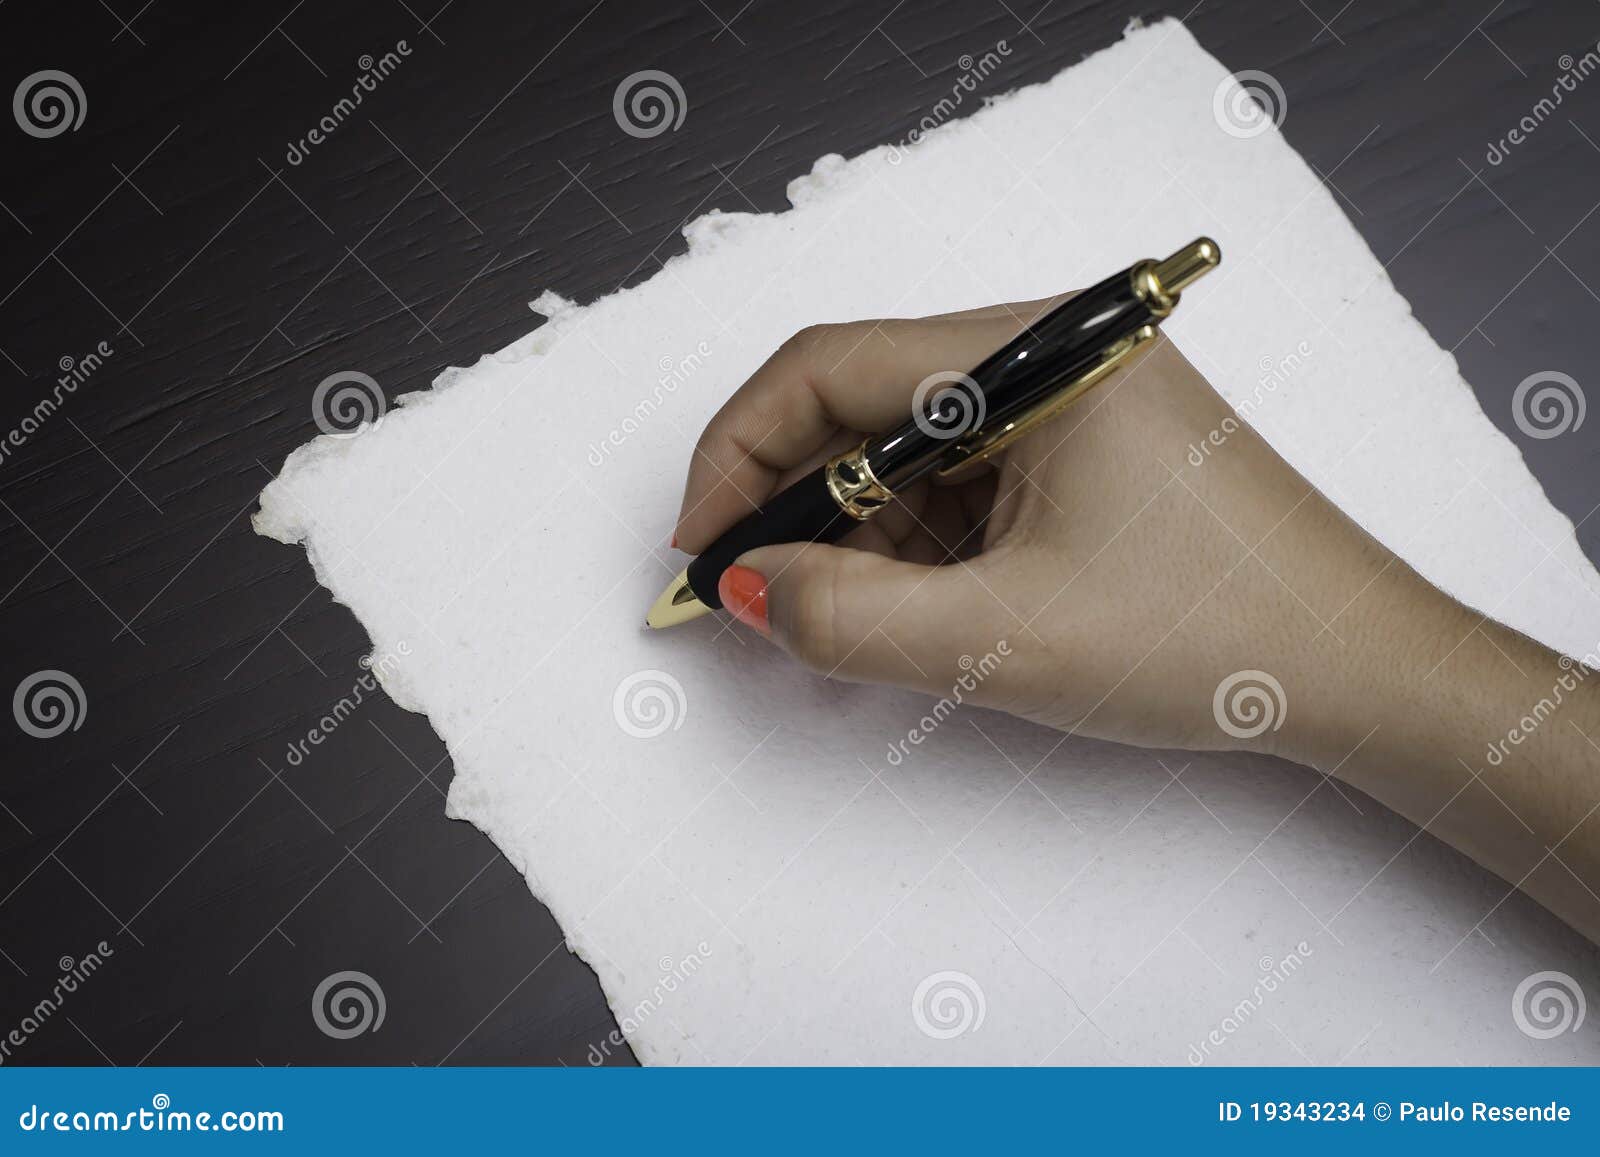 About to write stock photo. Image of human, office, correspondence ...